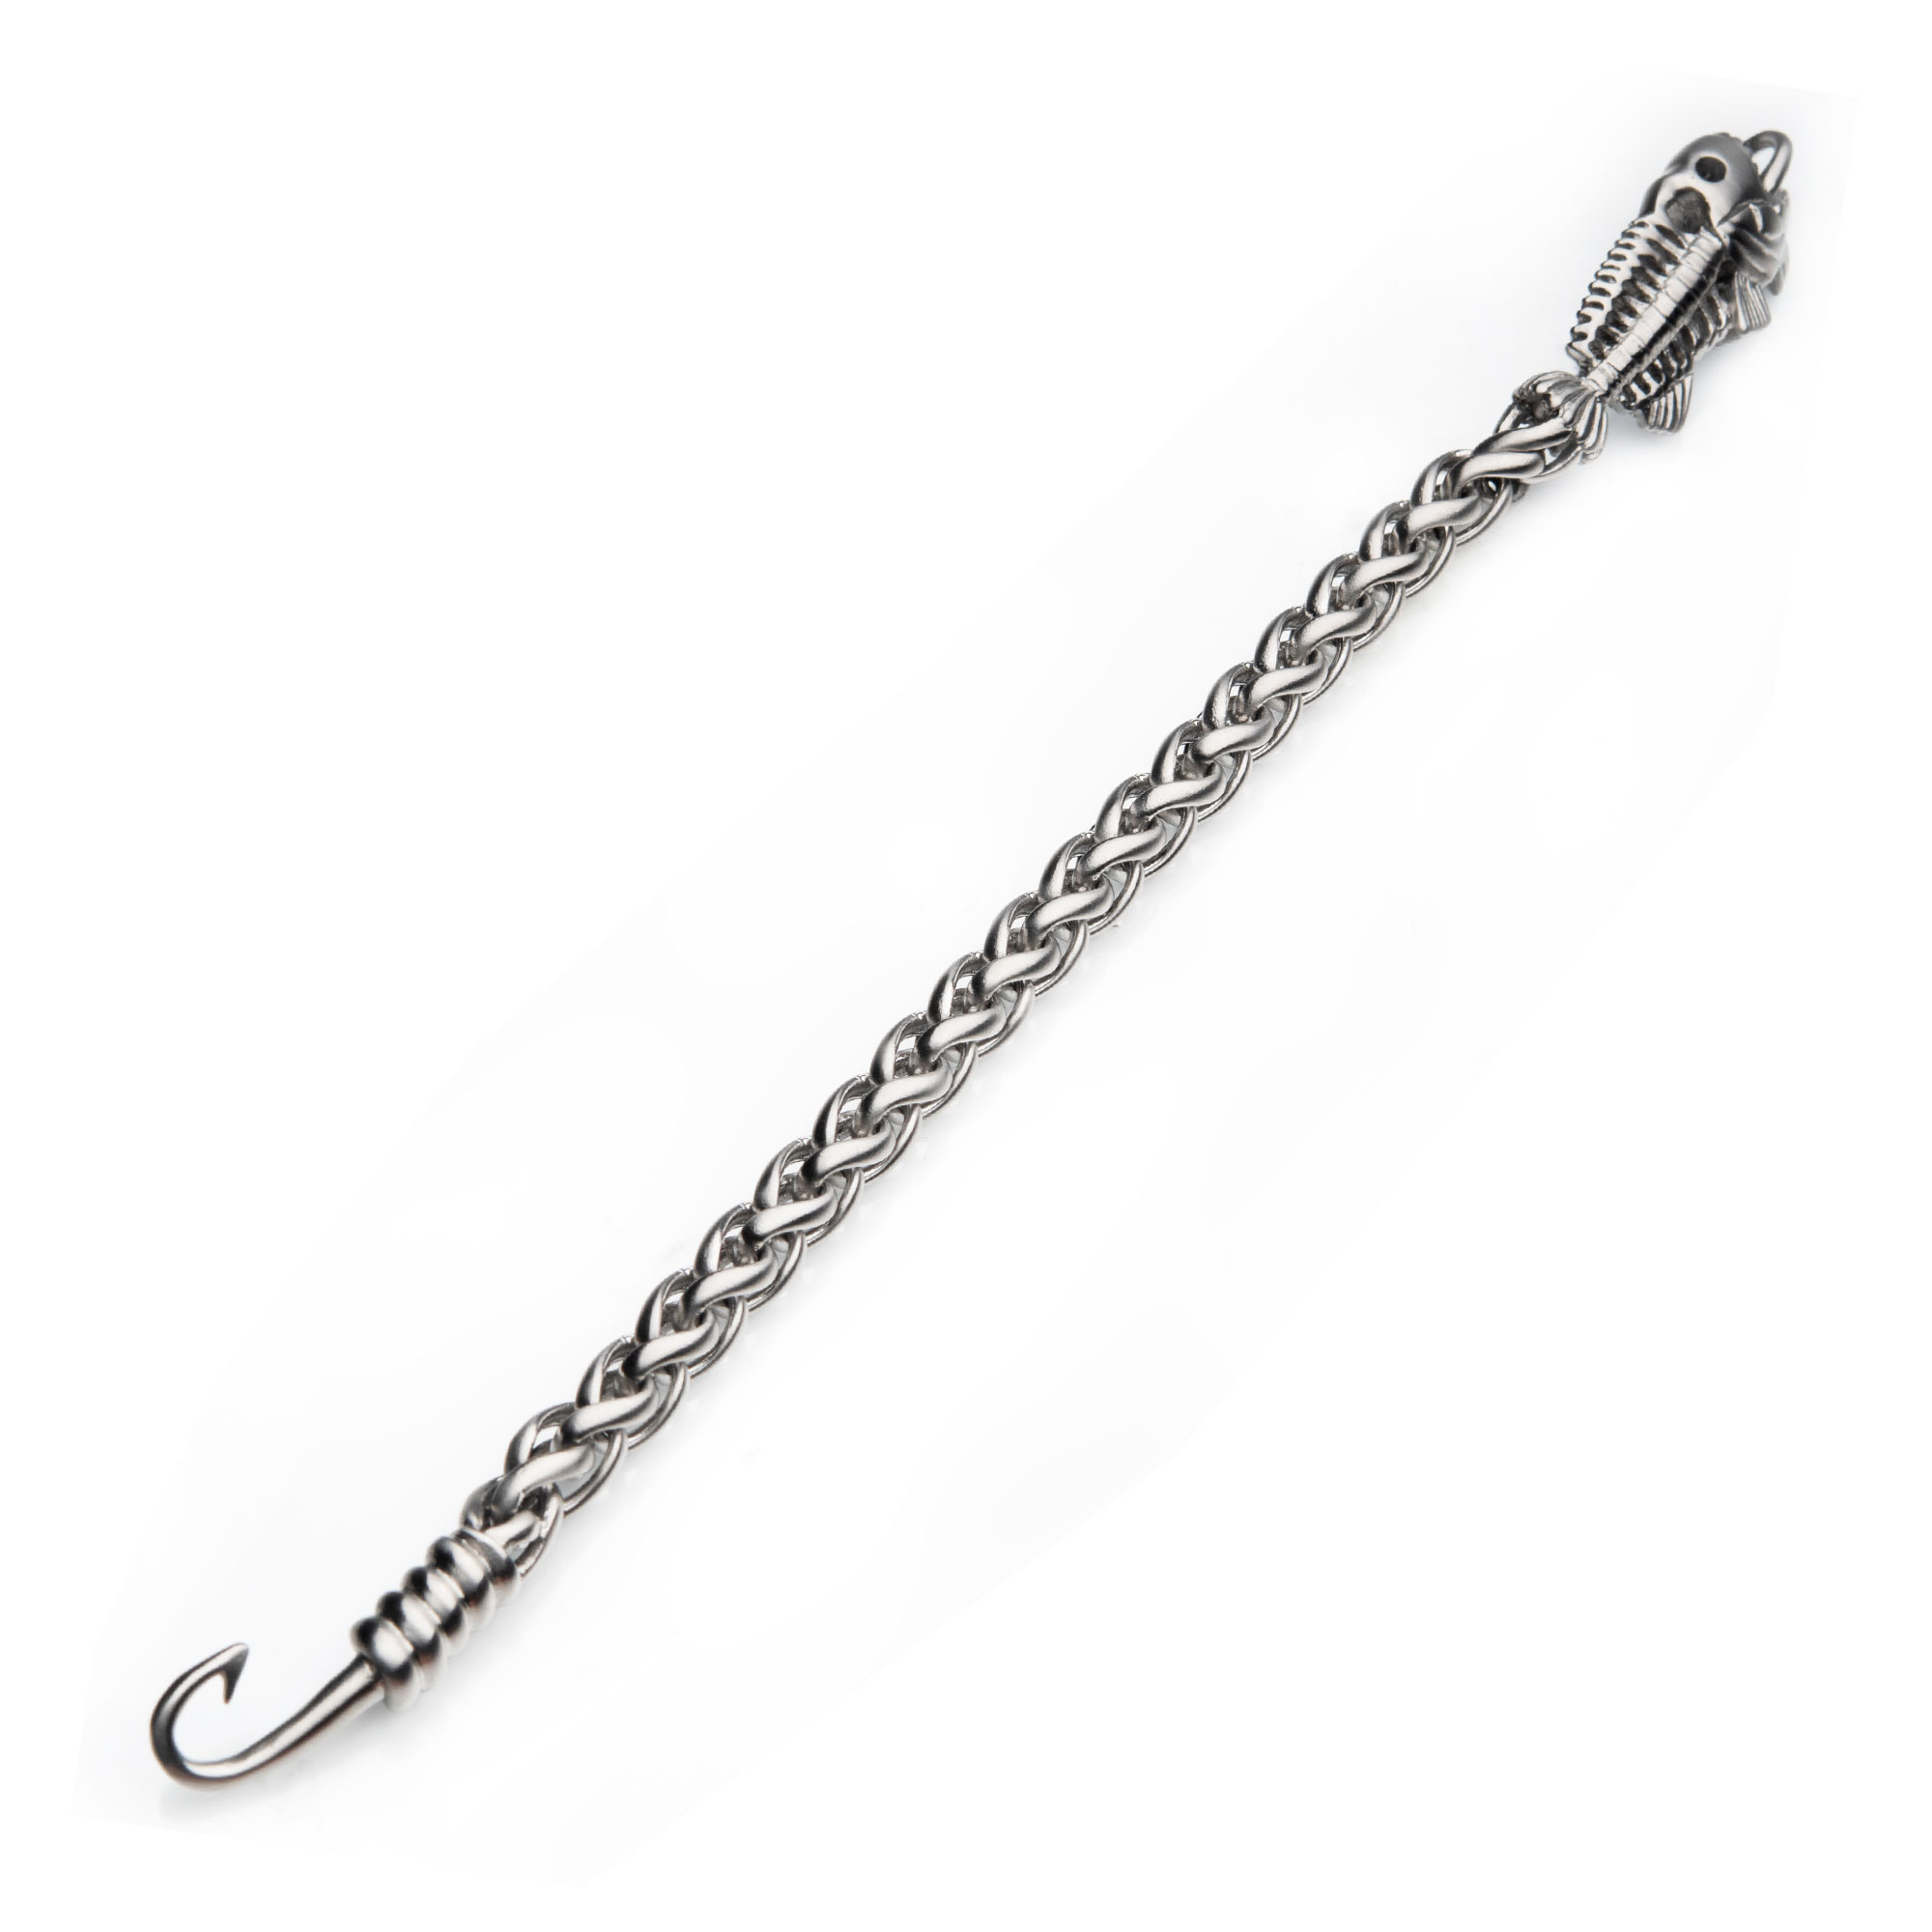 Polished Steel Wheat Chain with Fishbone on Hook Clasp Bracelet Image 2 Lewis Jewelers, Inc. Ansonia, CT